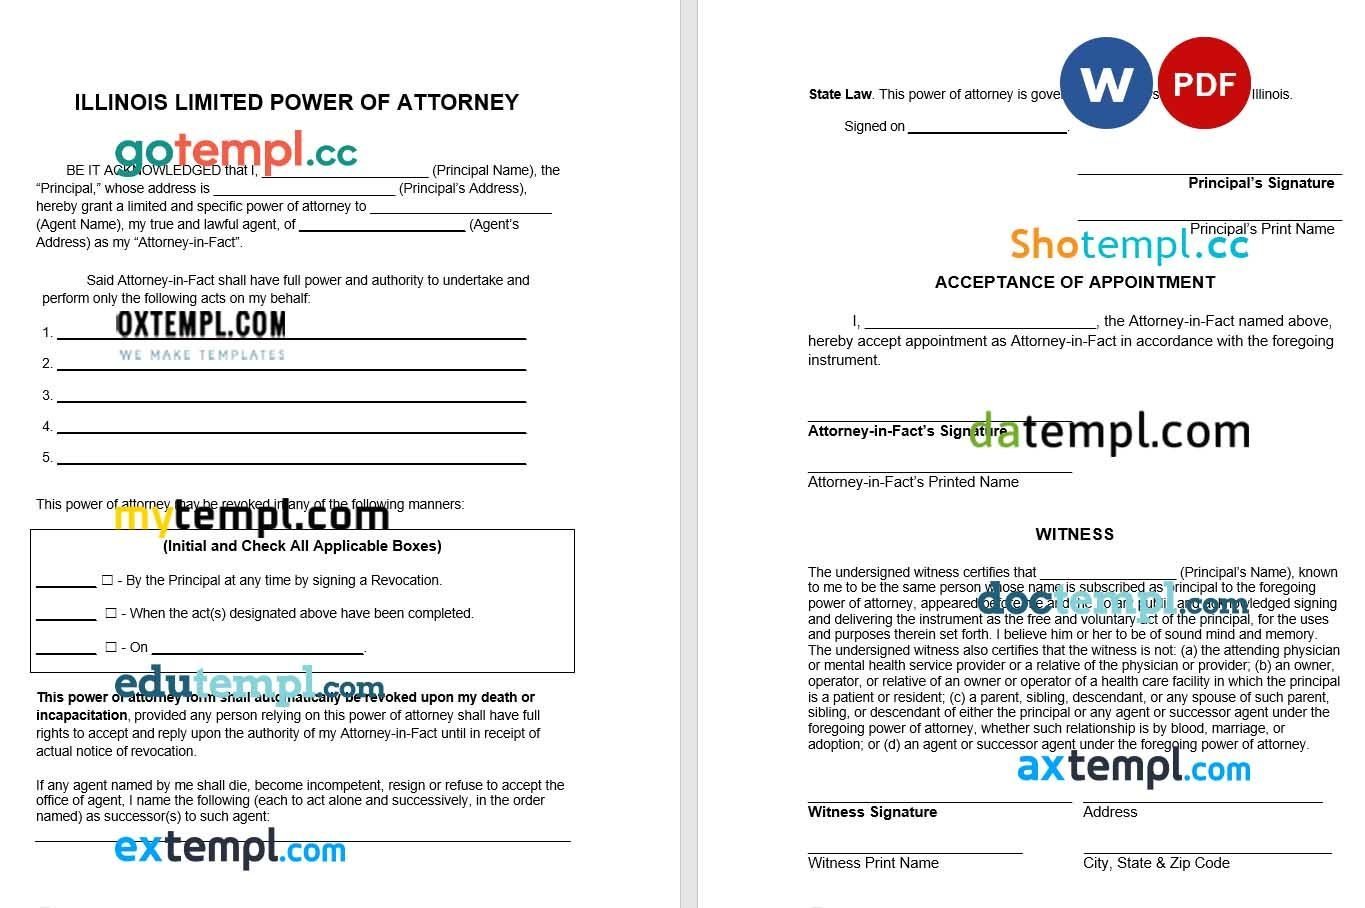 Illinois Limited Power of Attorney Form example, fully editable